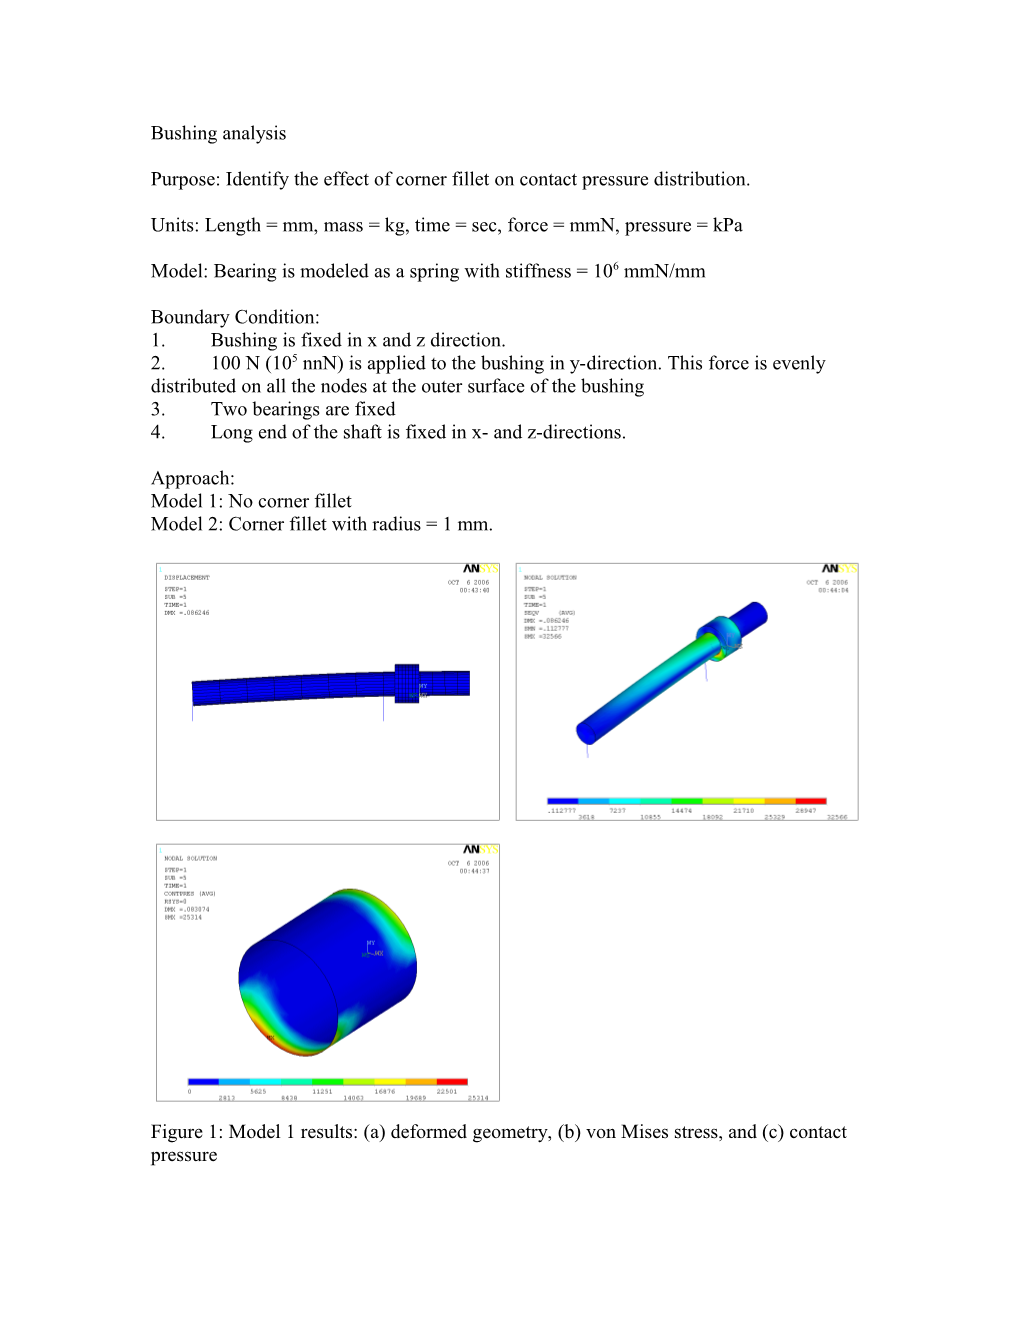 Purpose: Identify the Effect of Corner Fillet on Contact Pressure Distribution